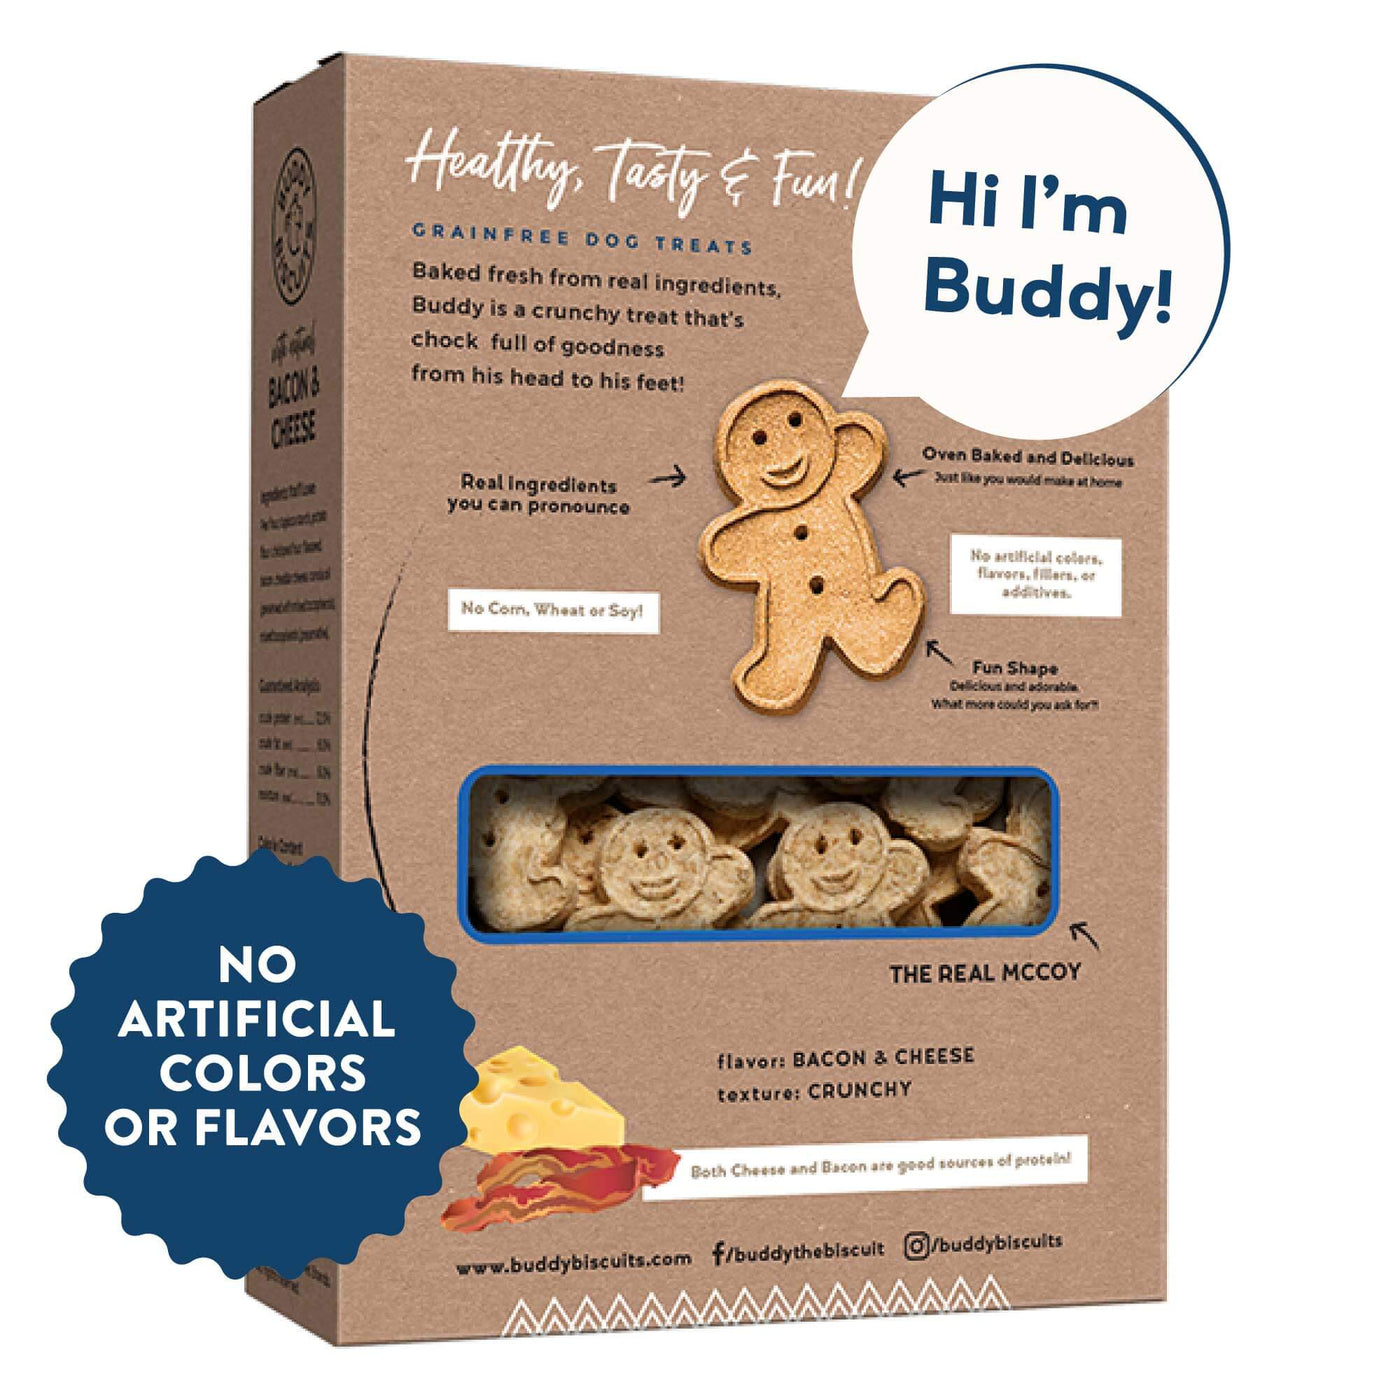 Bacon & Cheese Healthy Whole Grain Oven Baked Treats - Buddy Biscuits - PetToba-Buddy Biscuits